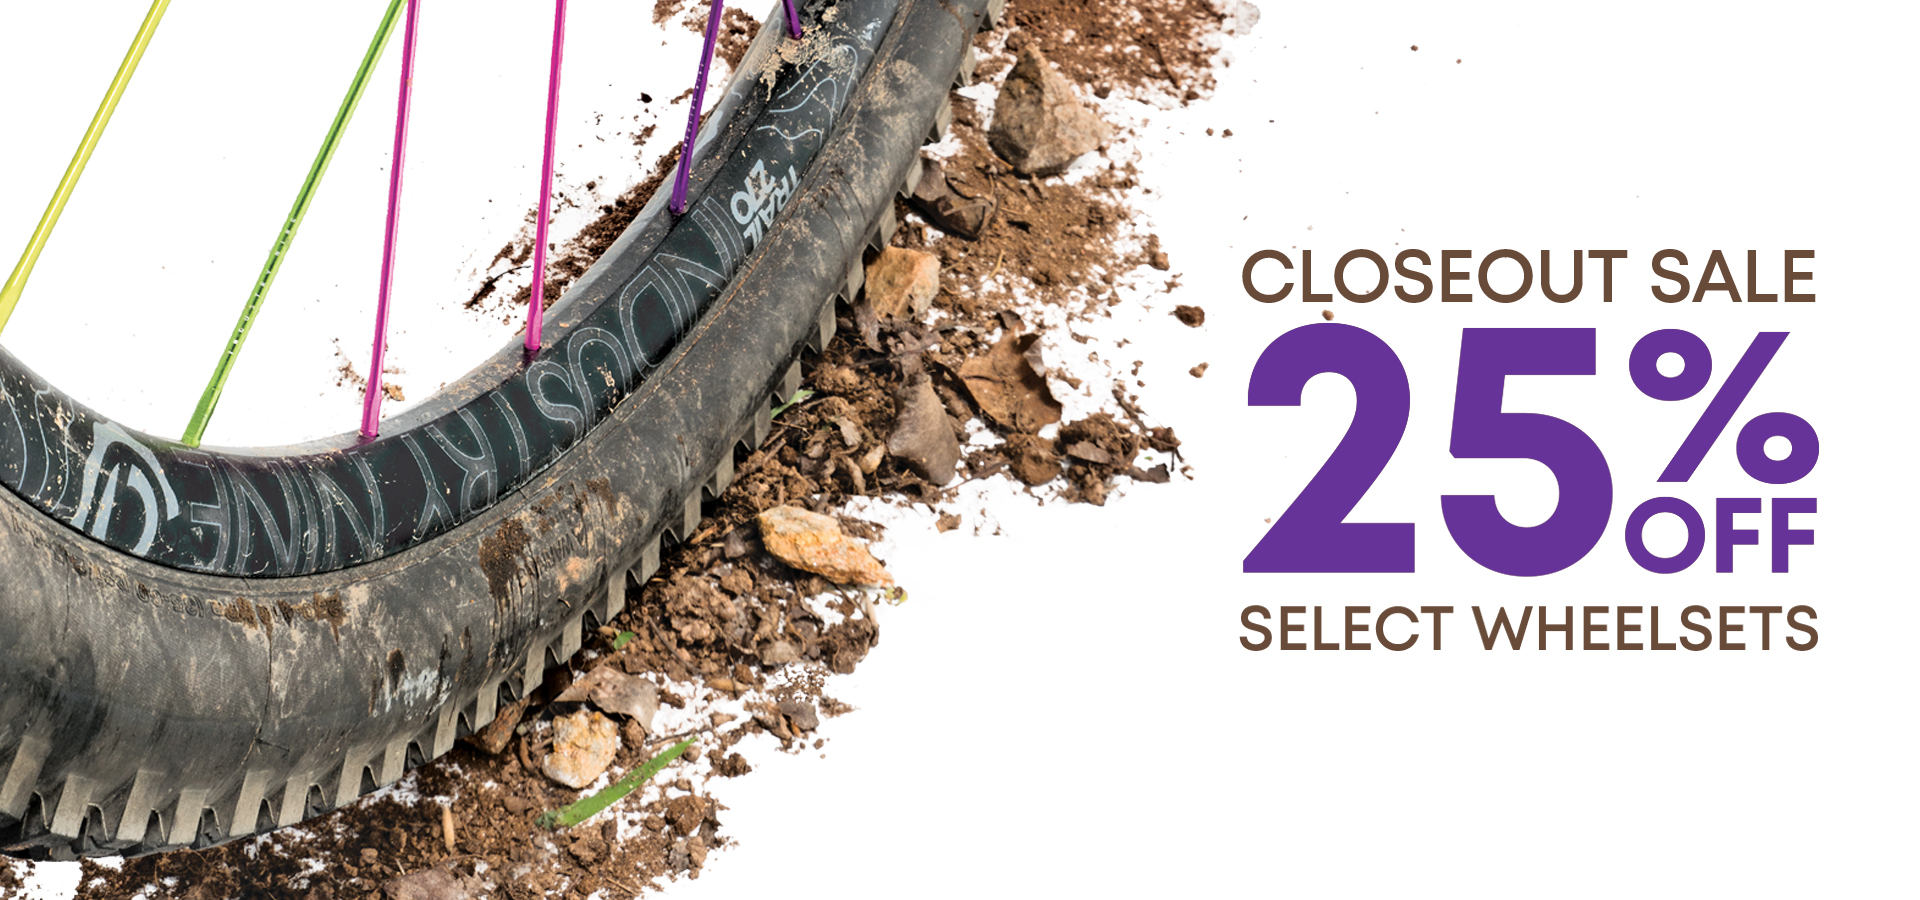 Save 25% on select wheelsets